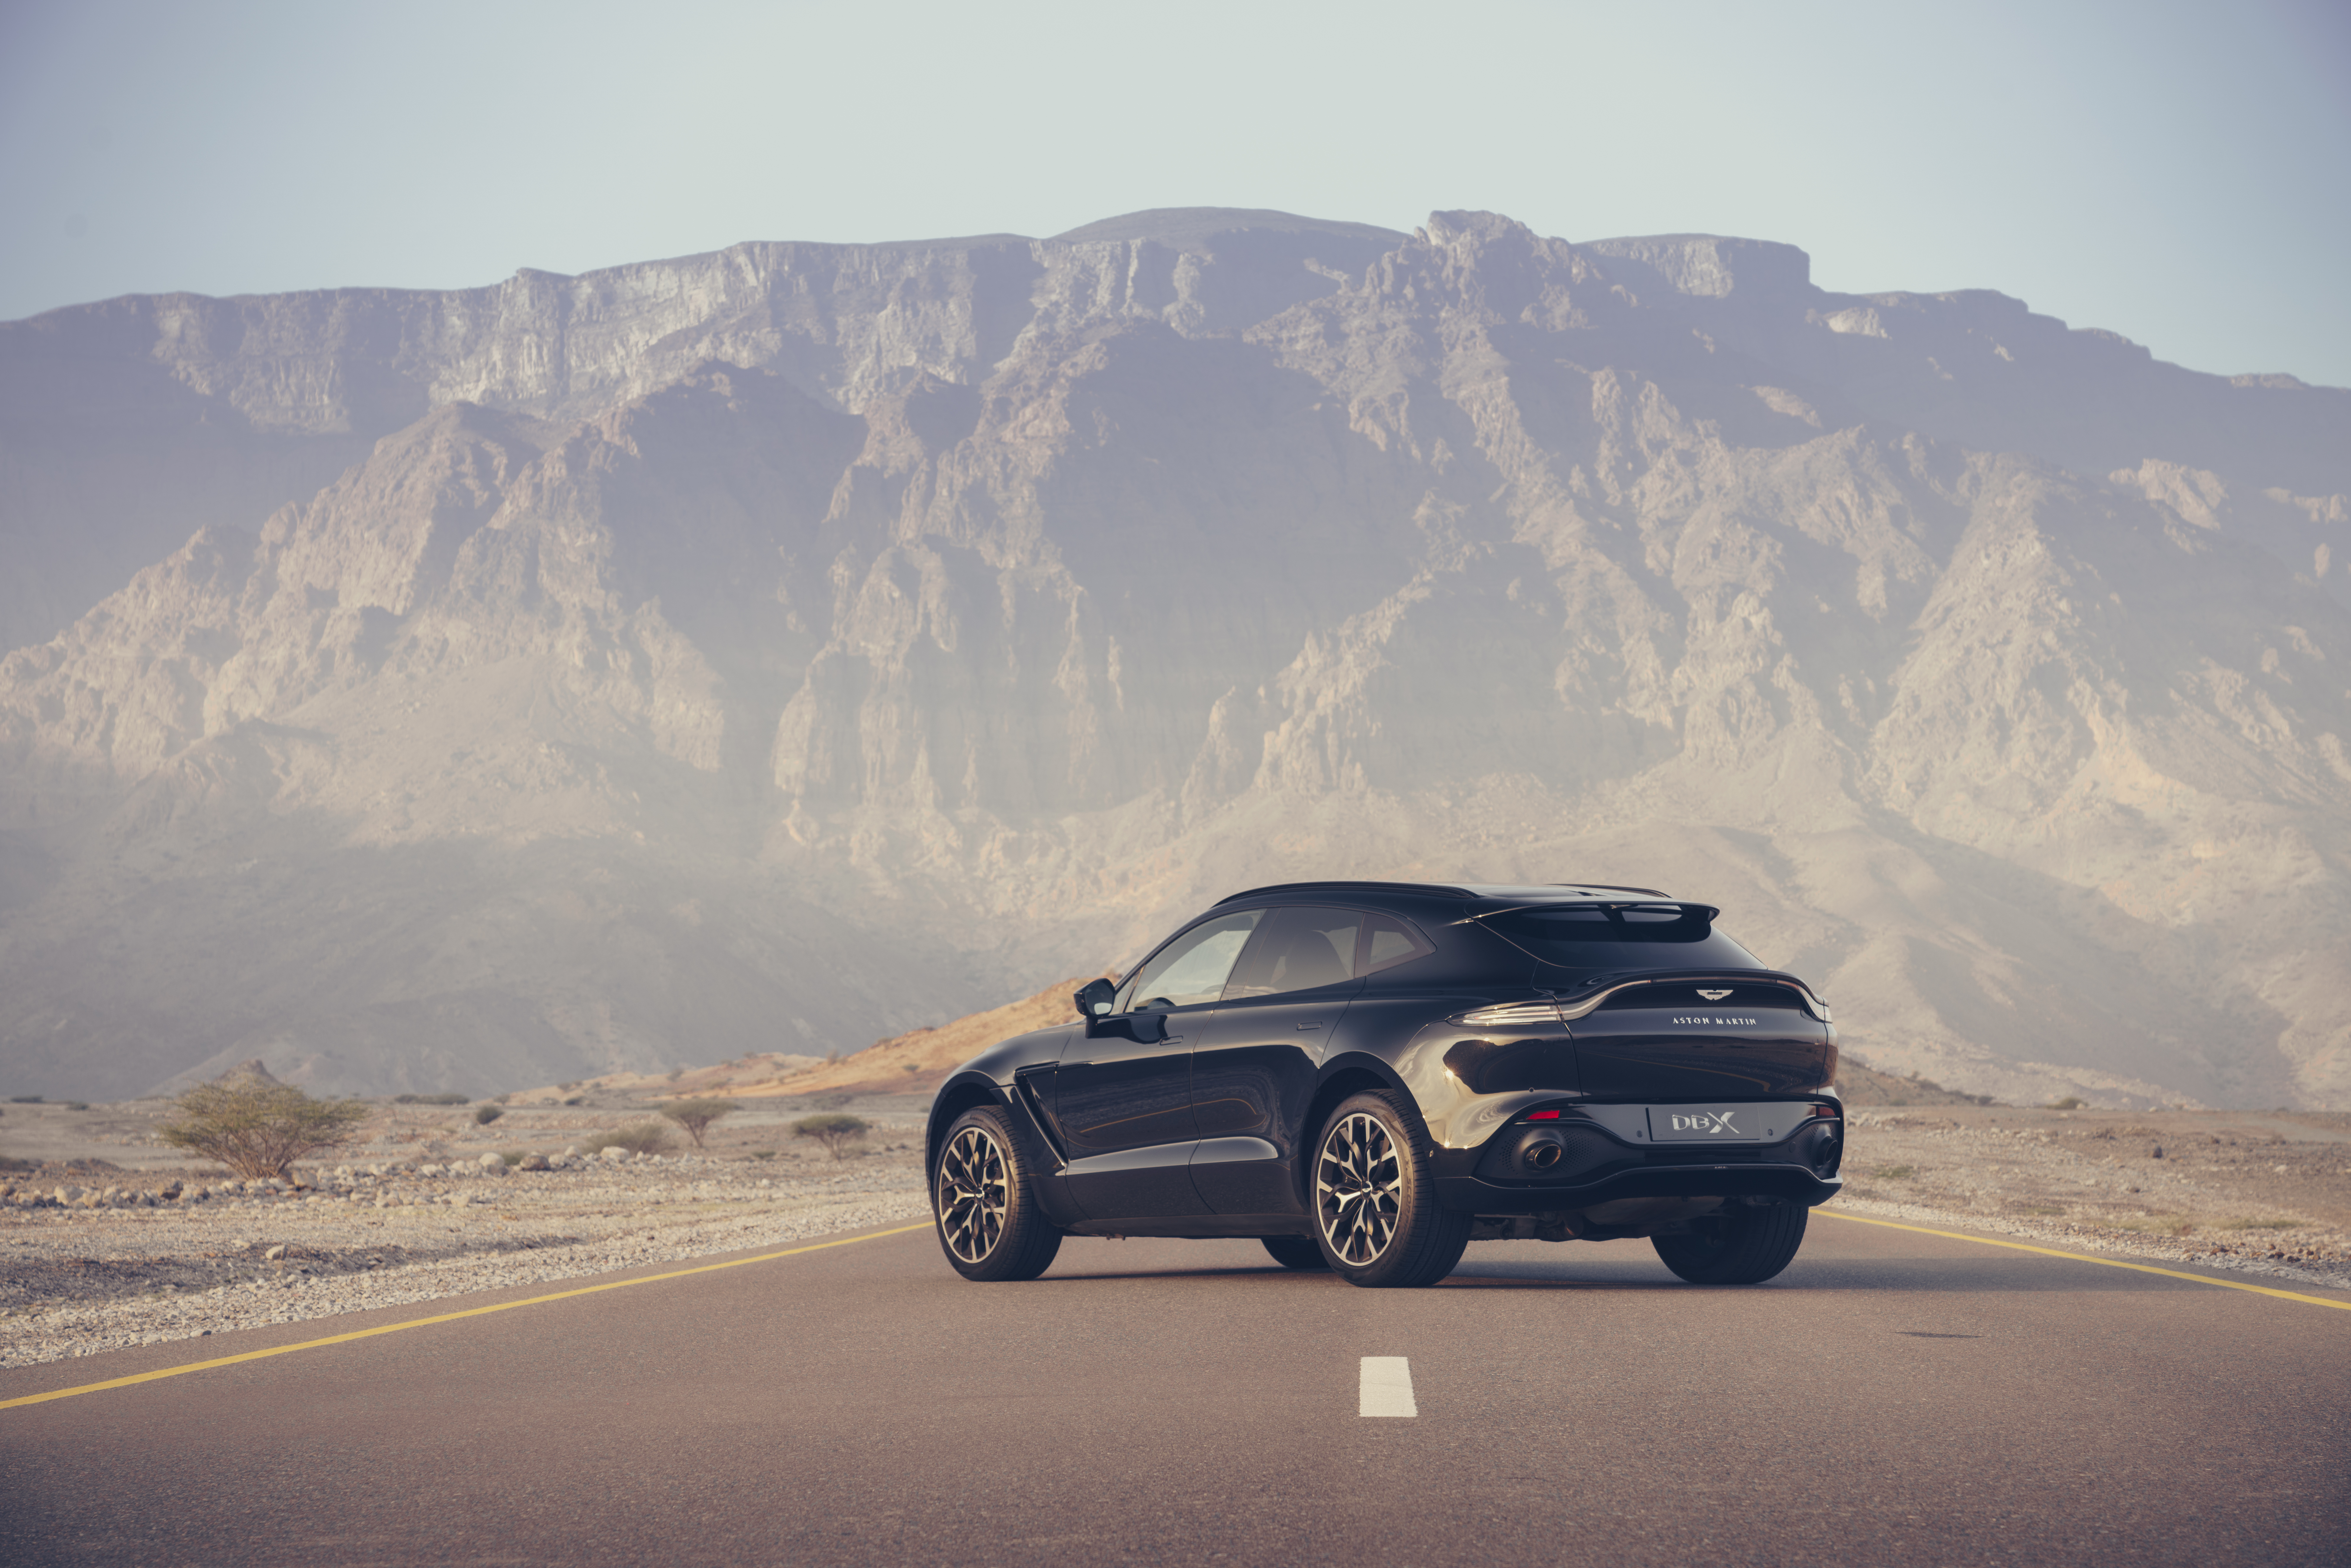 Aston Martin DBX in the Middle East 44 JPG